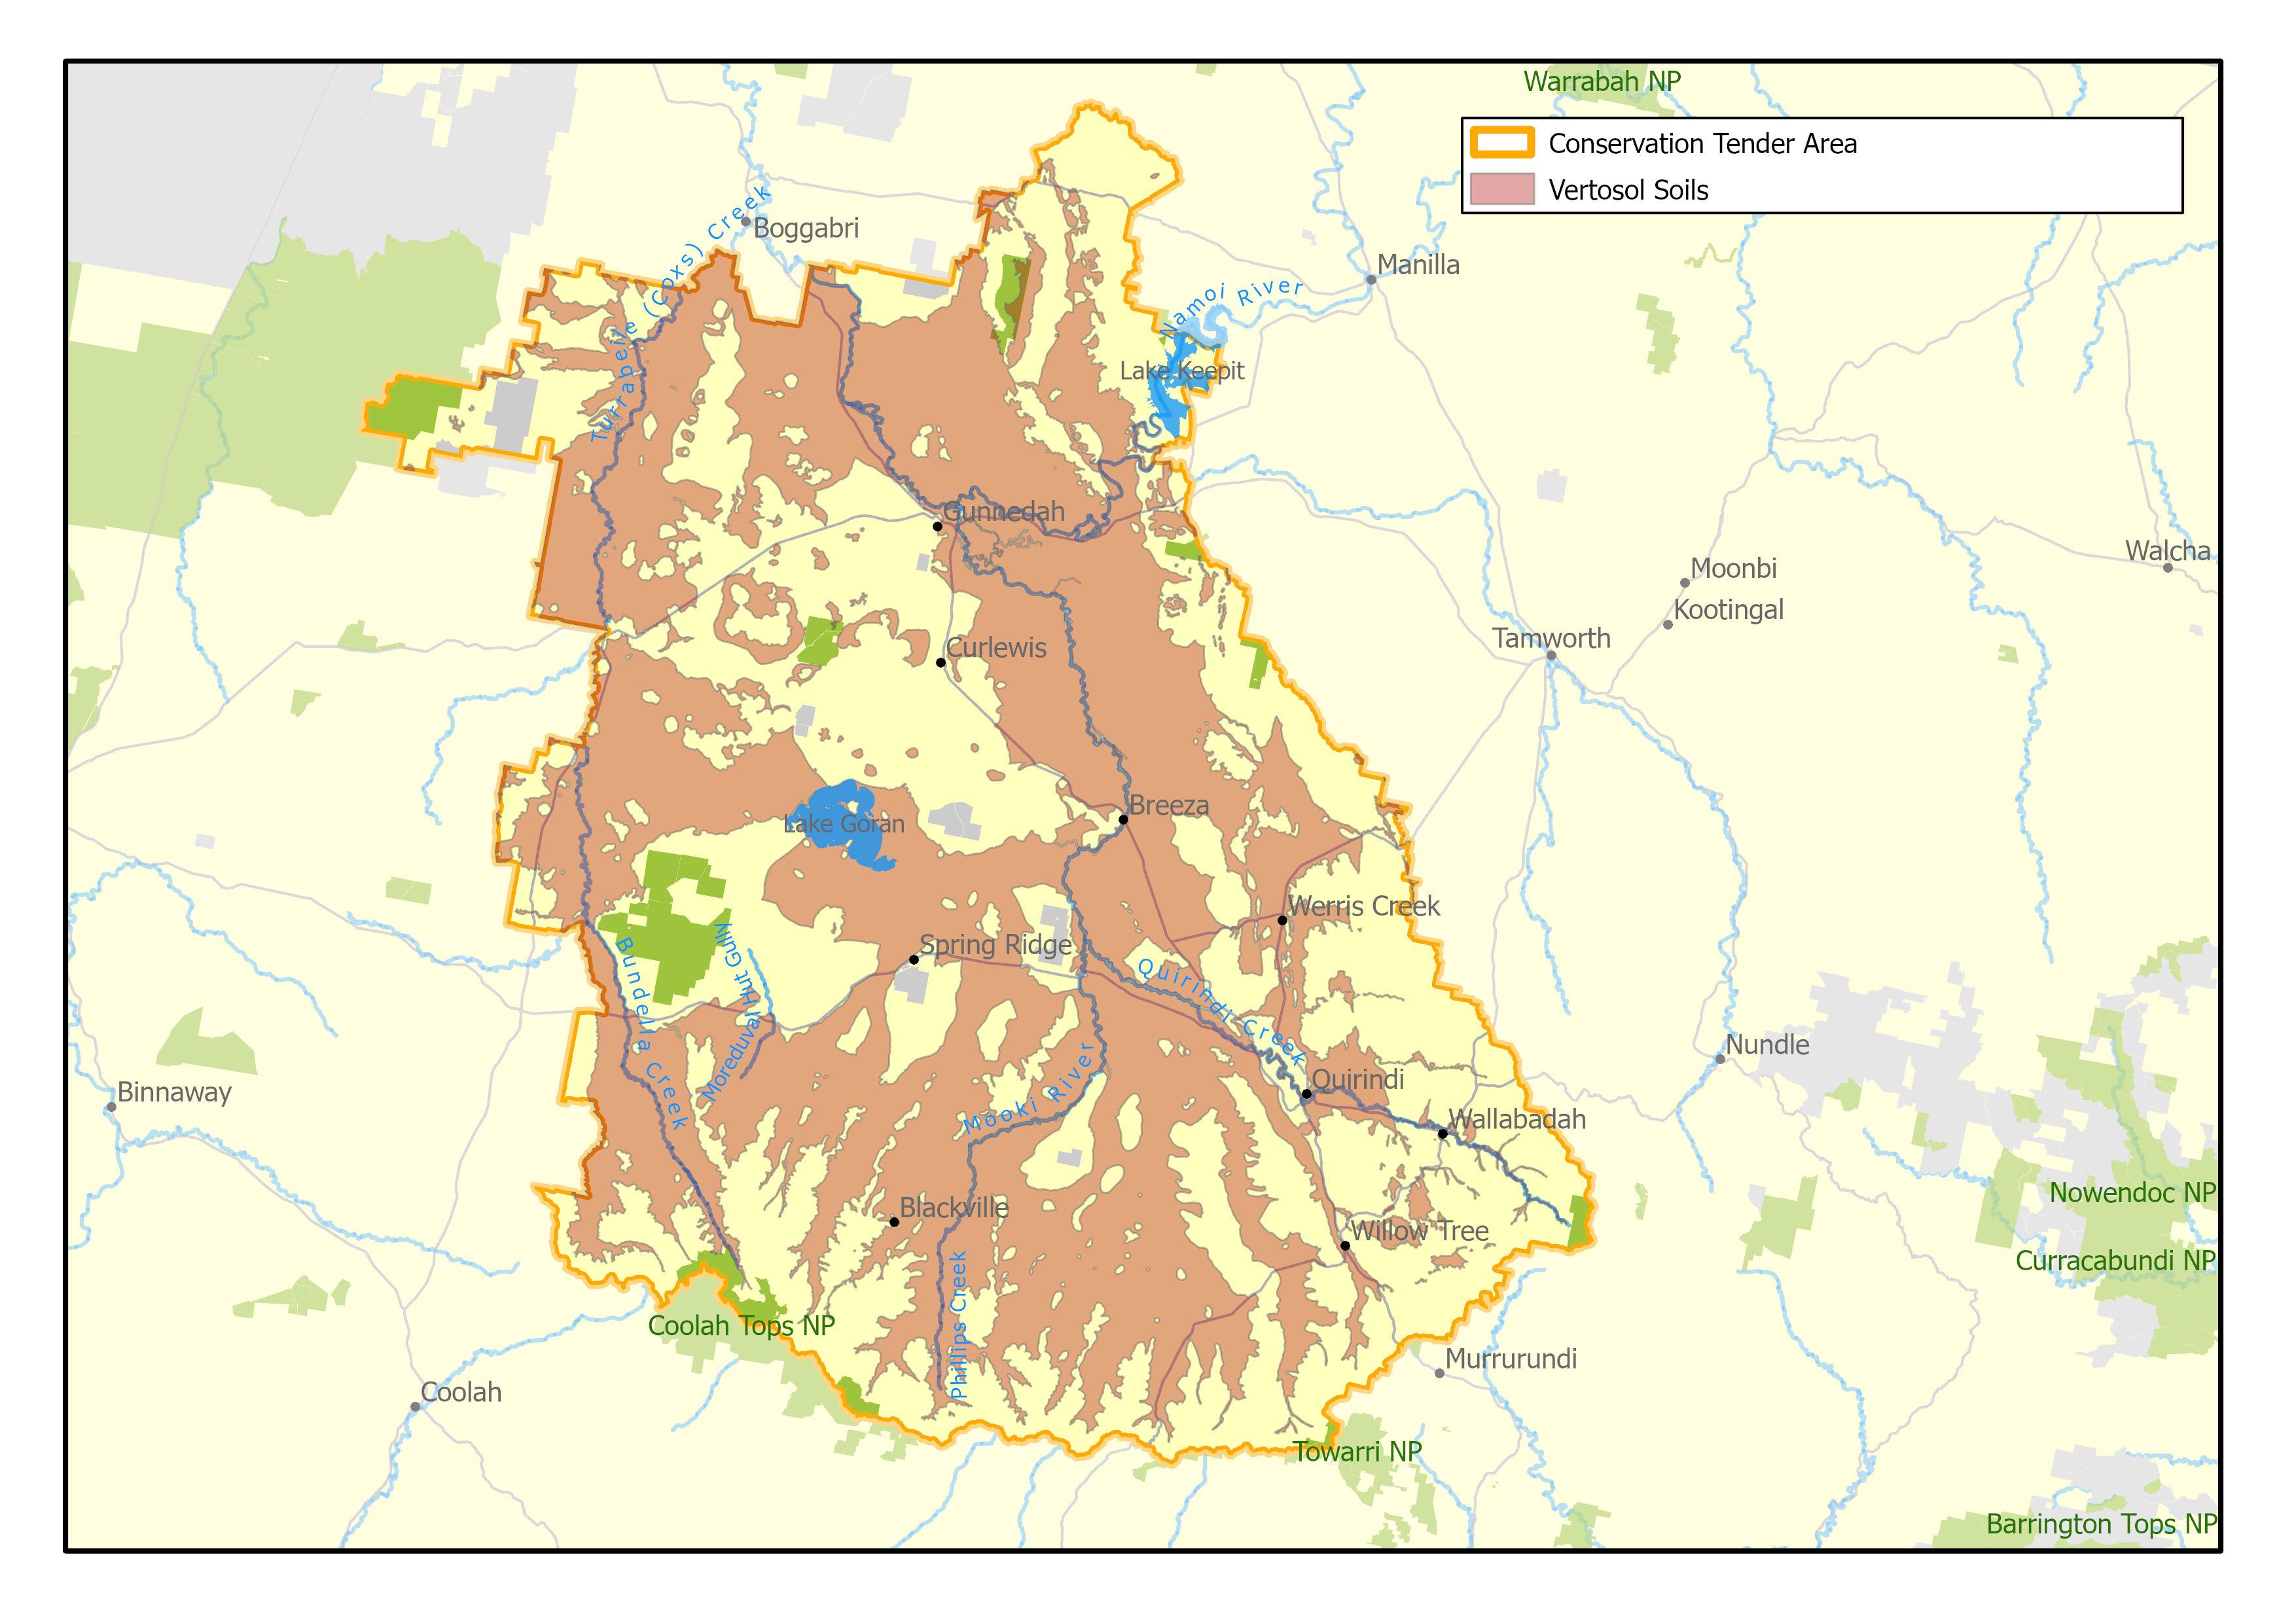 A representative map of the Liverpool Plains Cracking Clay conservation tender area